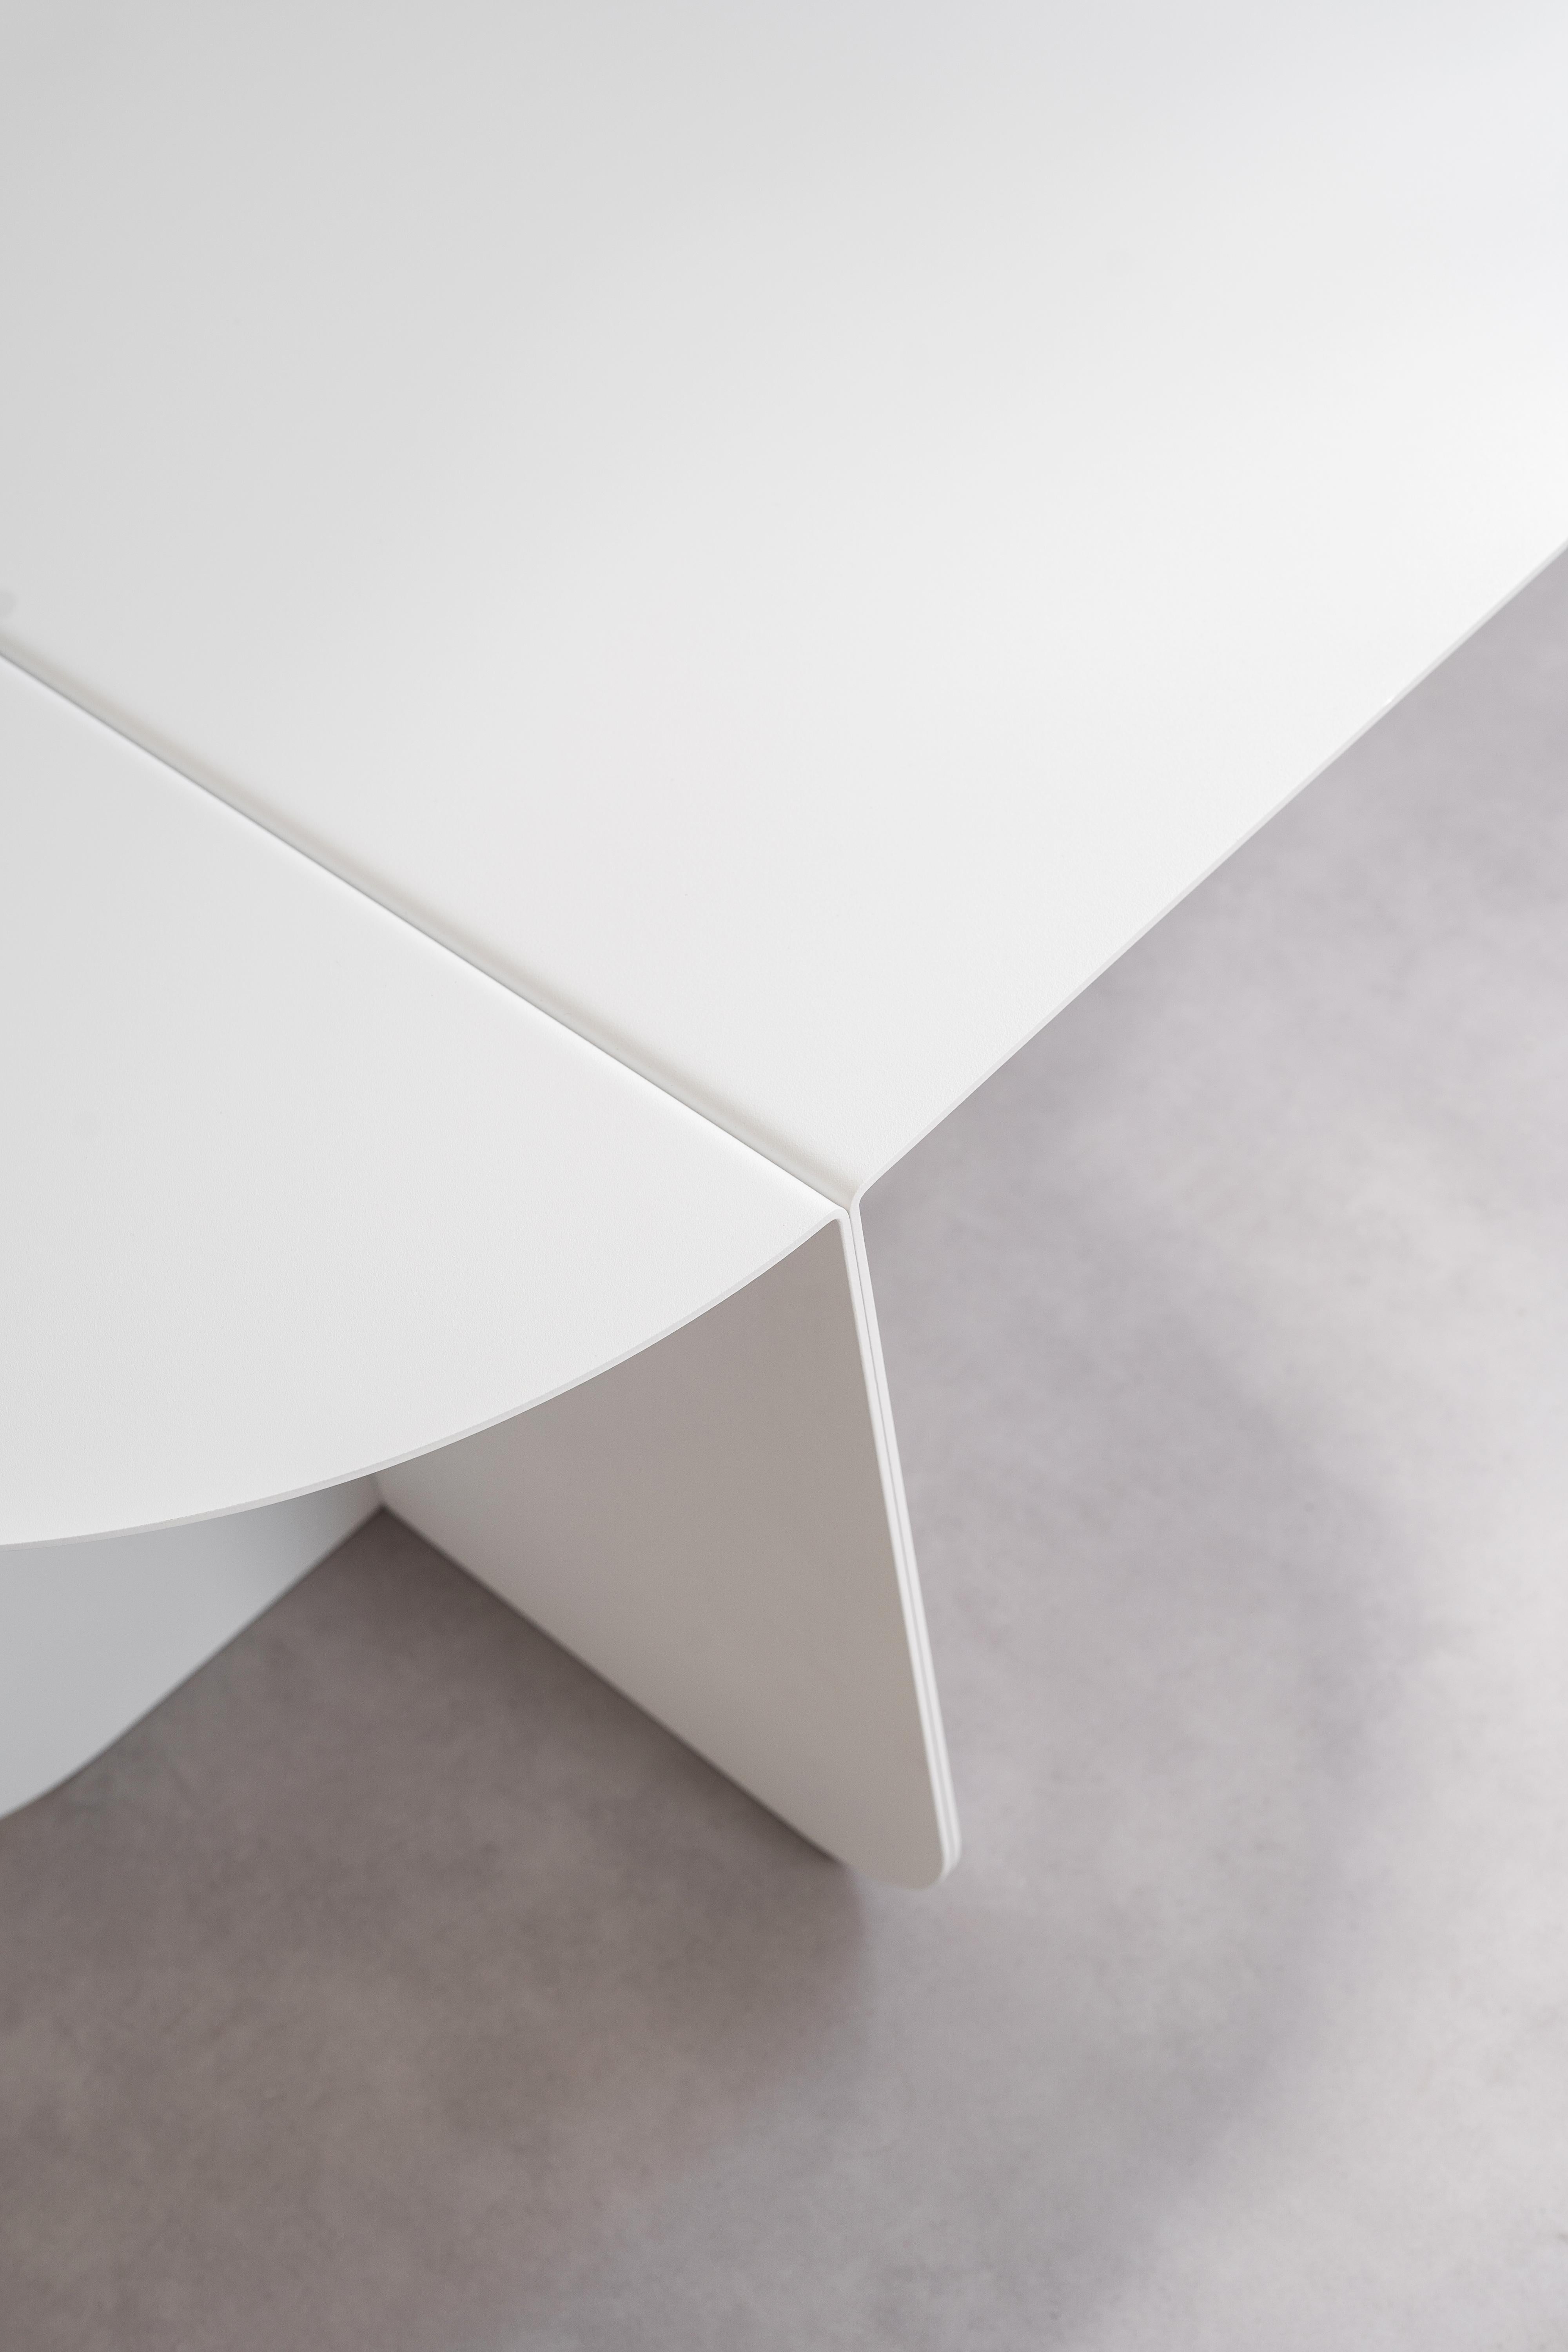 Colour, a Modern Oval Coffee Table, Ral 1013 - Oyster White, by Bas Vellekoop In New Condition For Sale In 'S-GRAVENHAGE, ZH